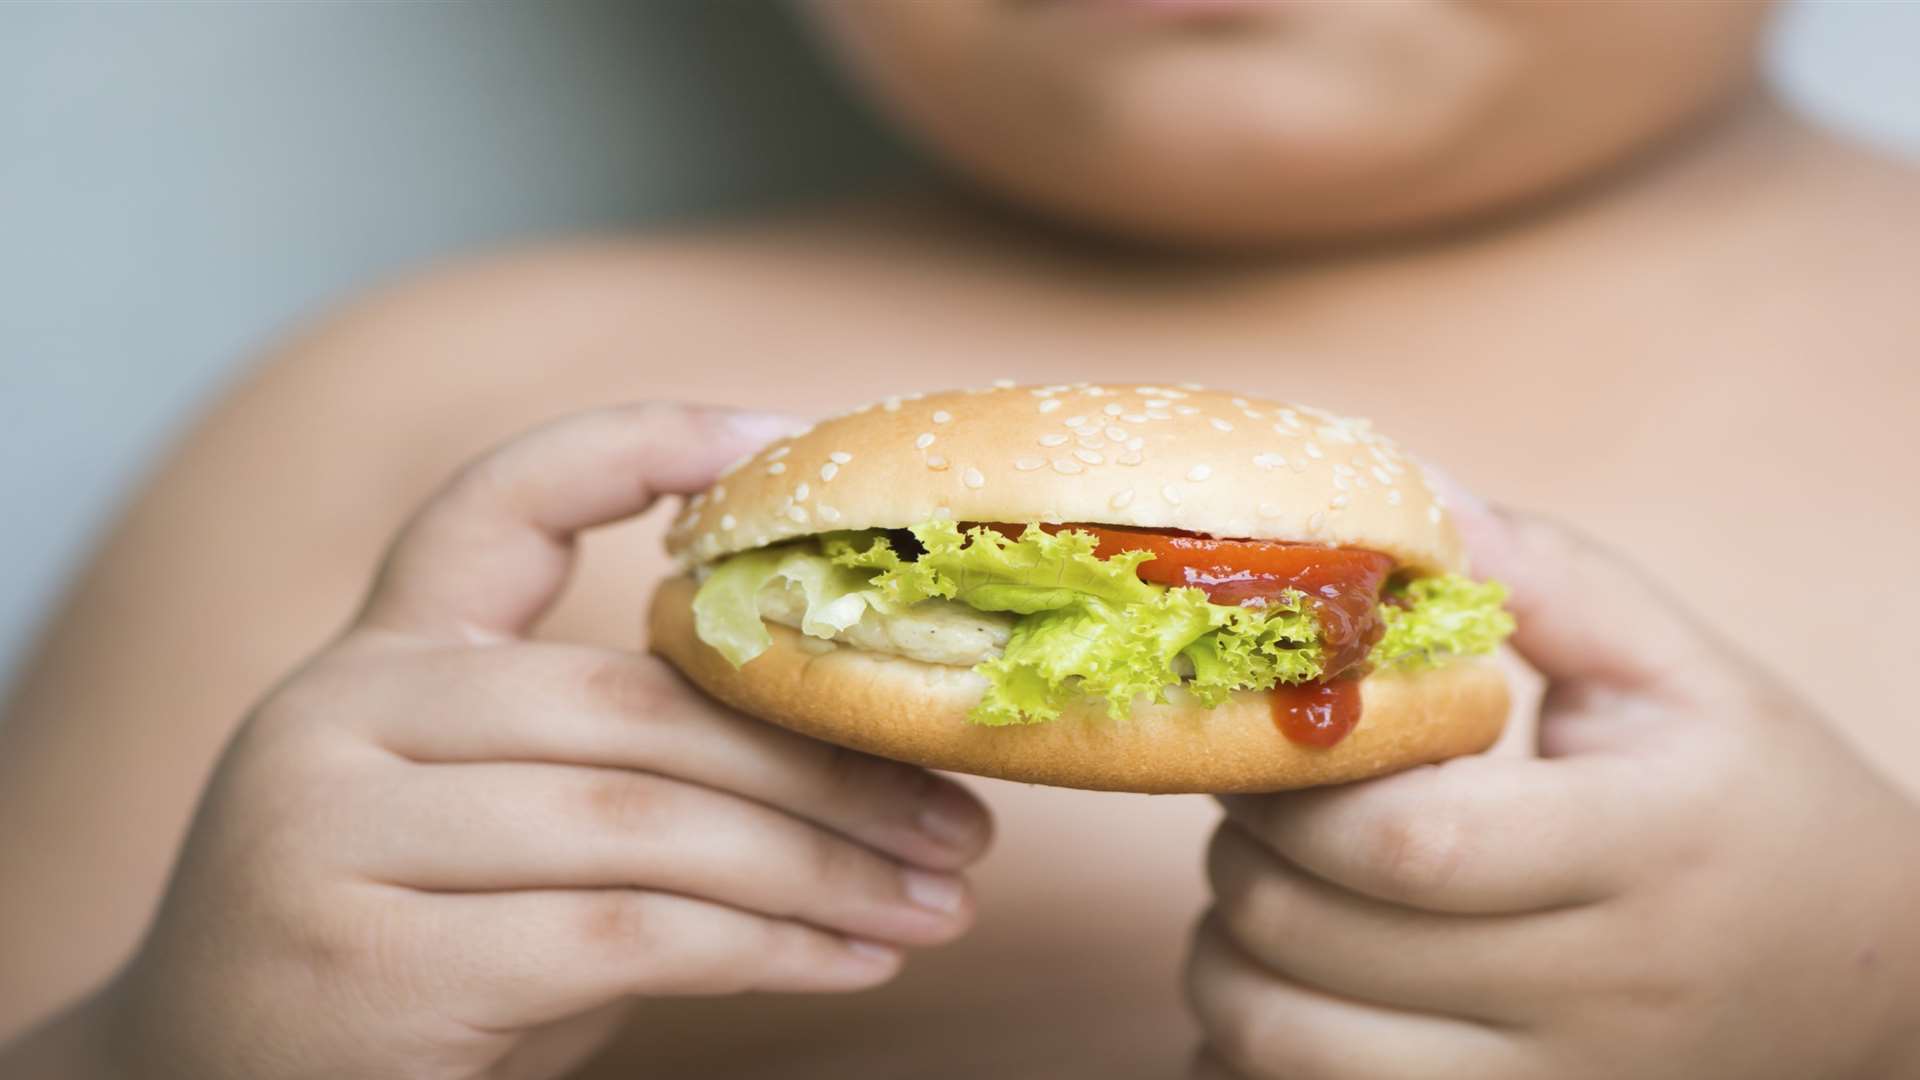 Dr Sahota says there are two main reasons why so many children – and adults – are now obese